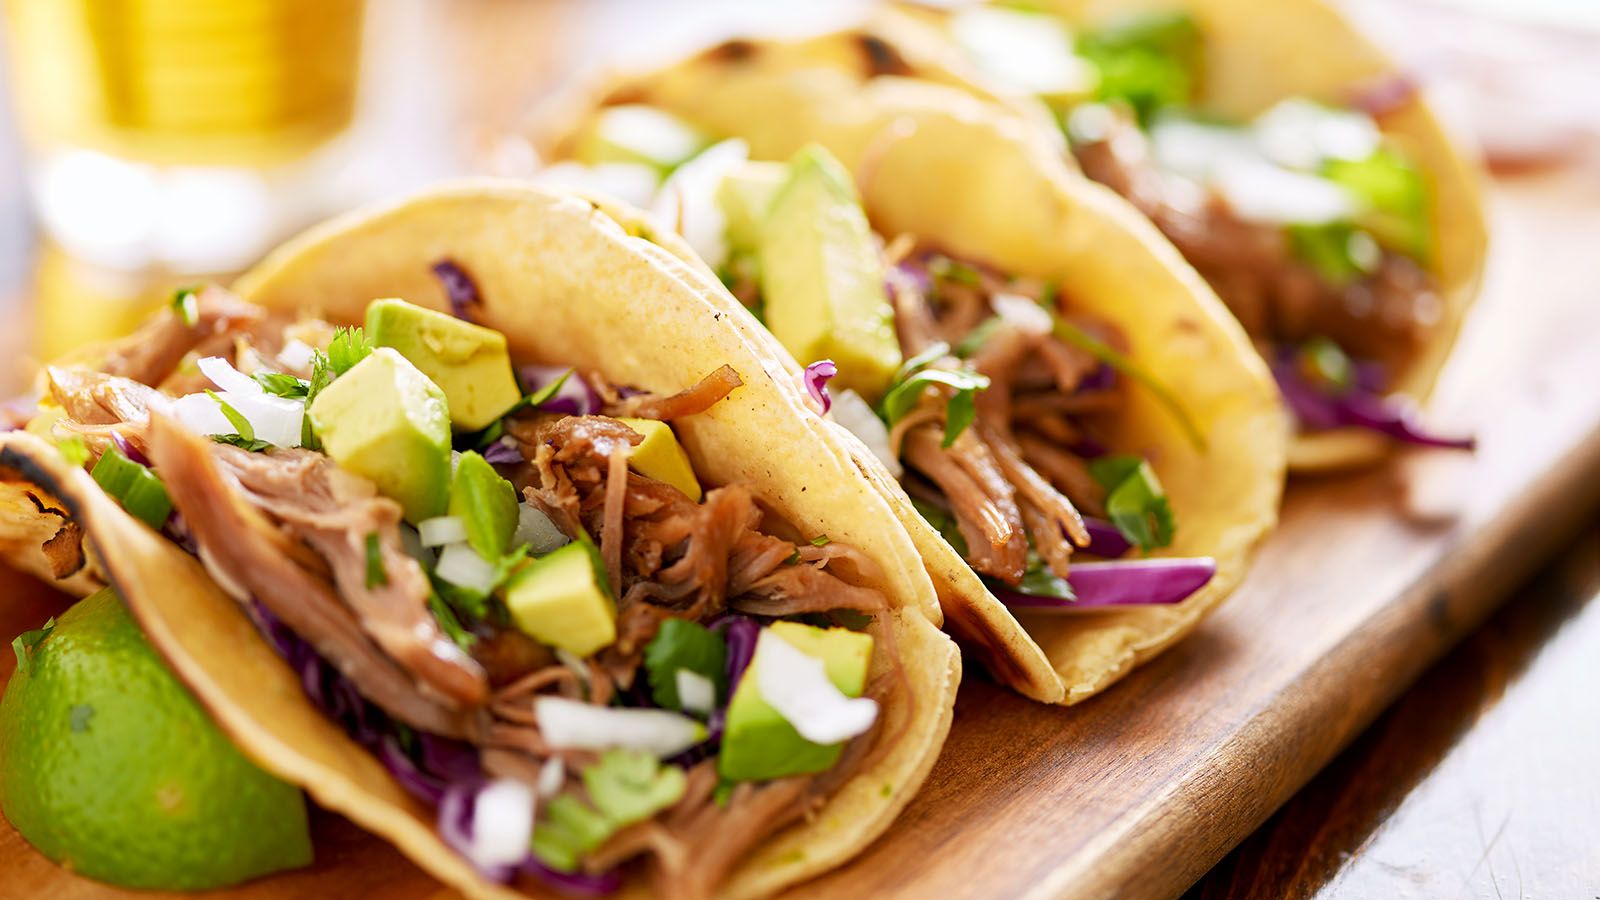 The Tacos, Tequila, & Margarita Festival returns to Headwaters Park on May 11.